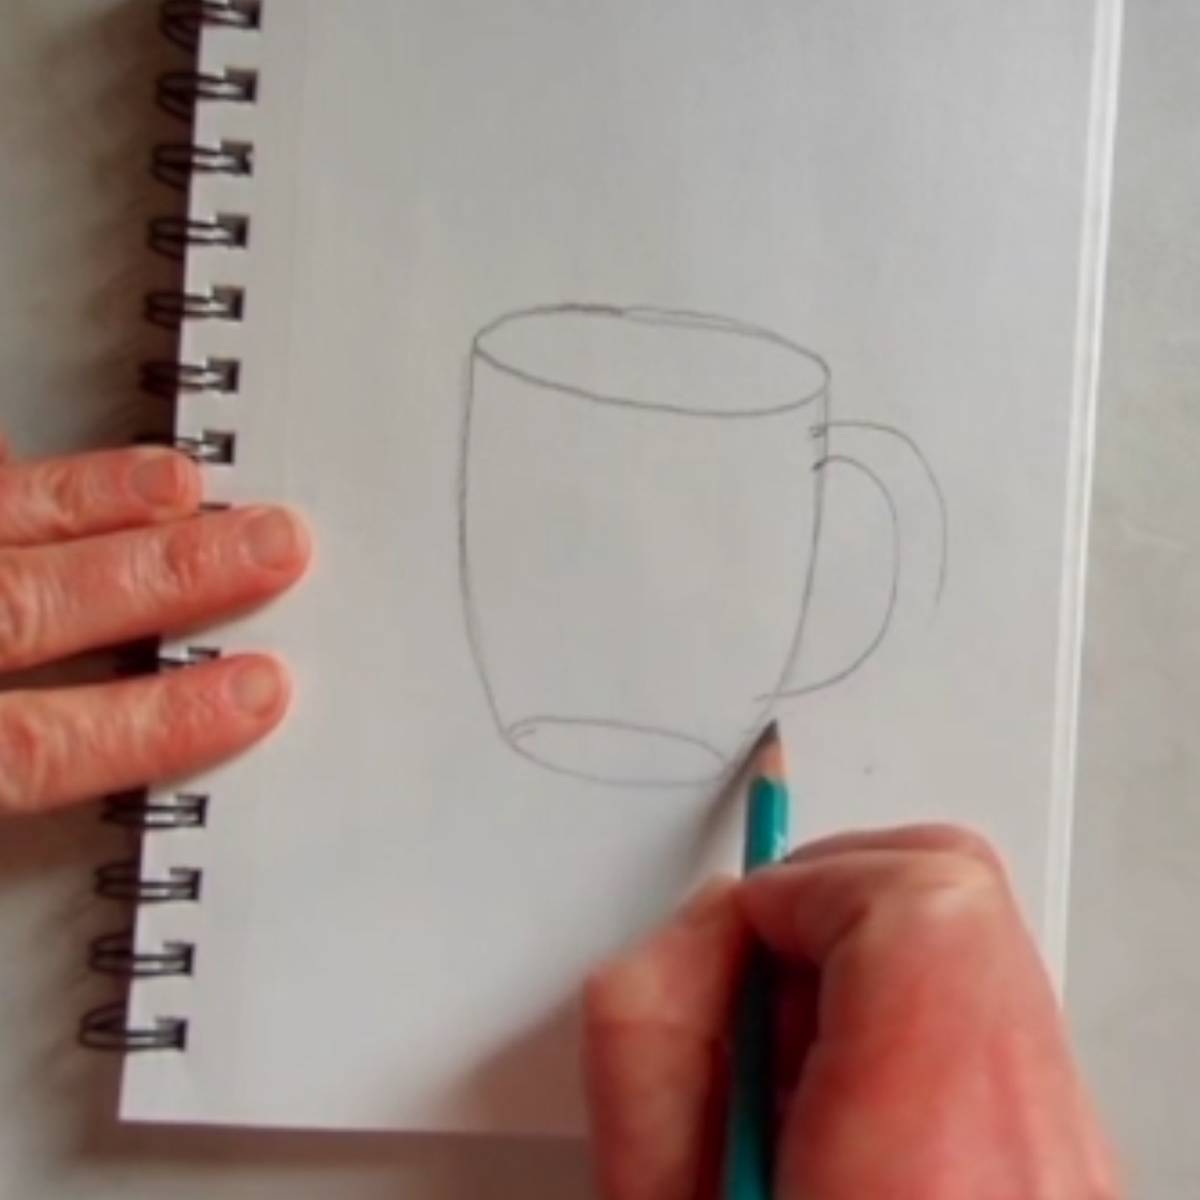 Beginning sketch of a coffee mug in pencil with the handle added in.